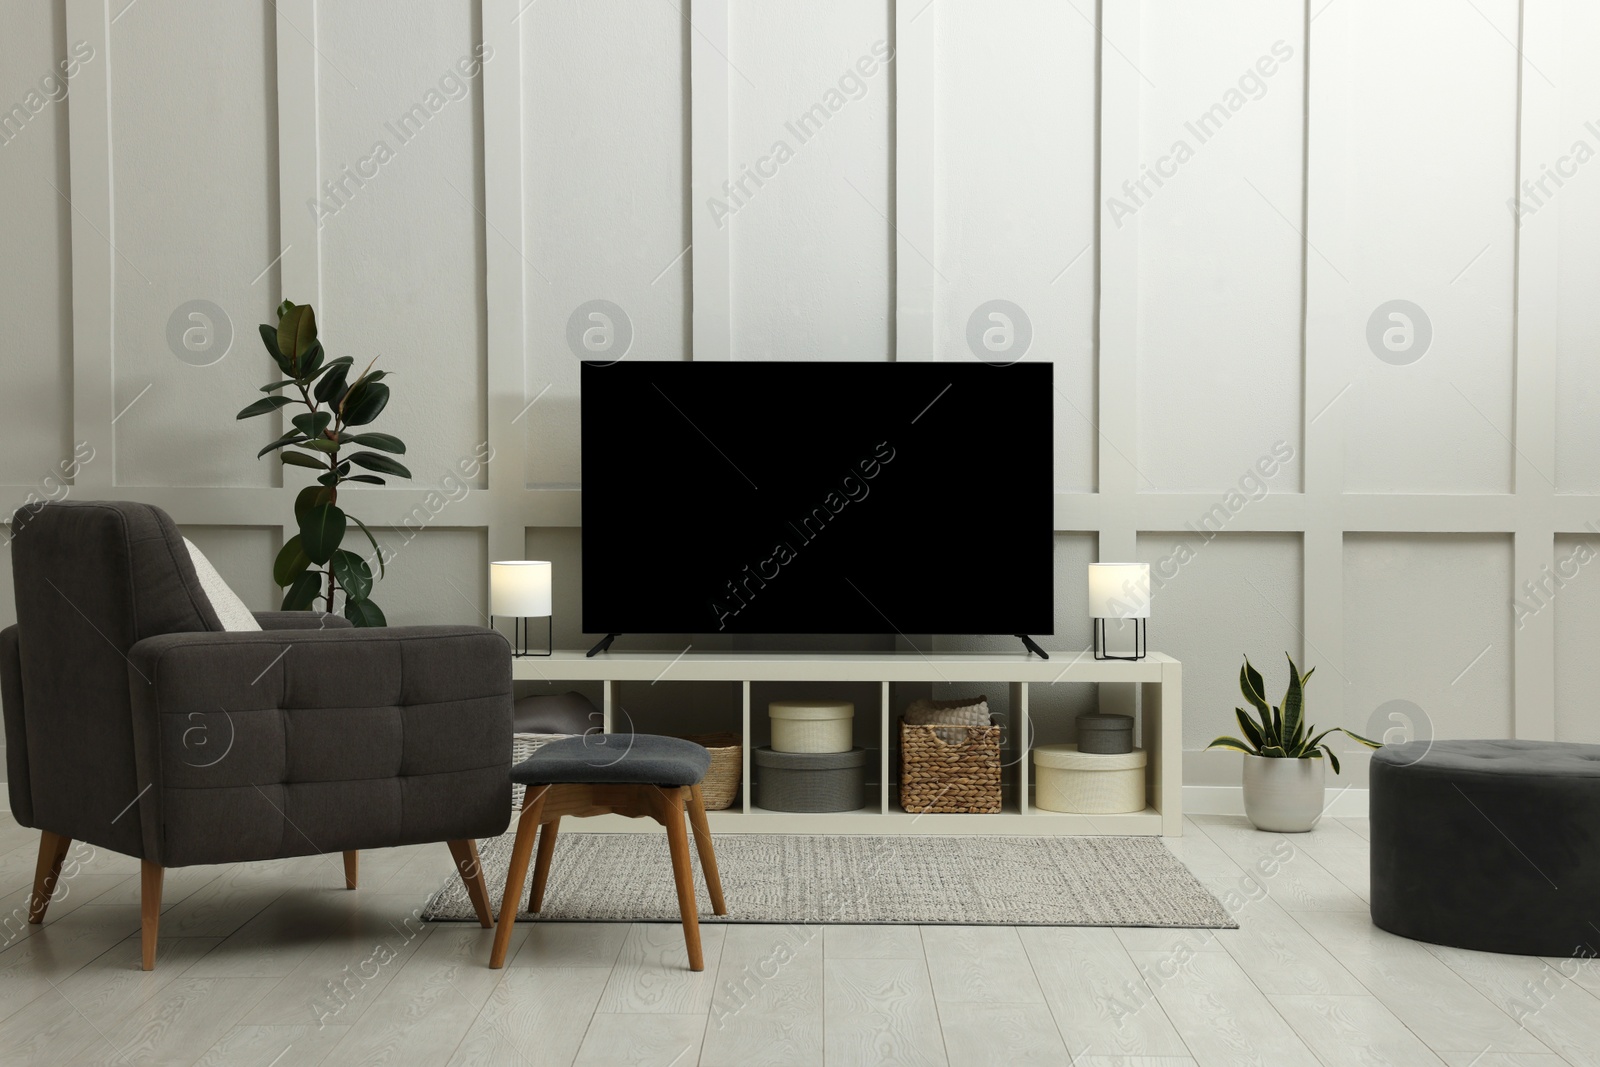 Photo of Modern TV on cabinet, beautiful houseplants and armchair indoors. Interior design